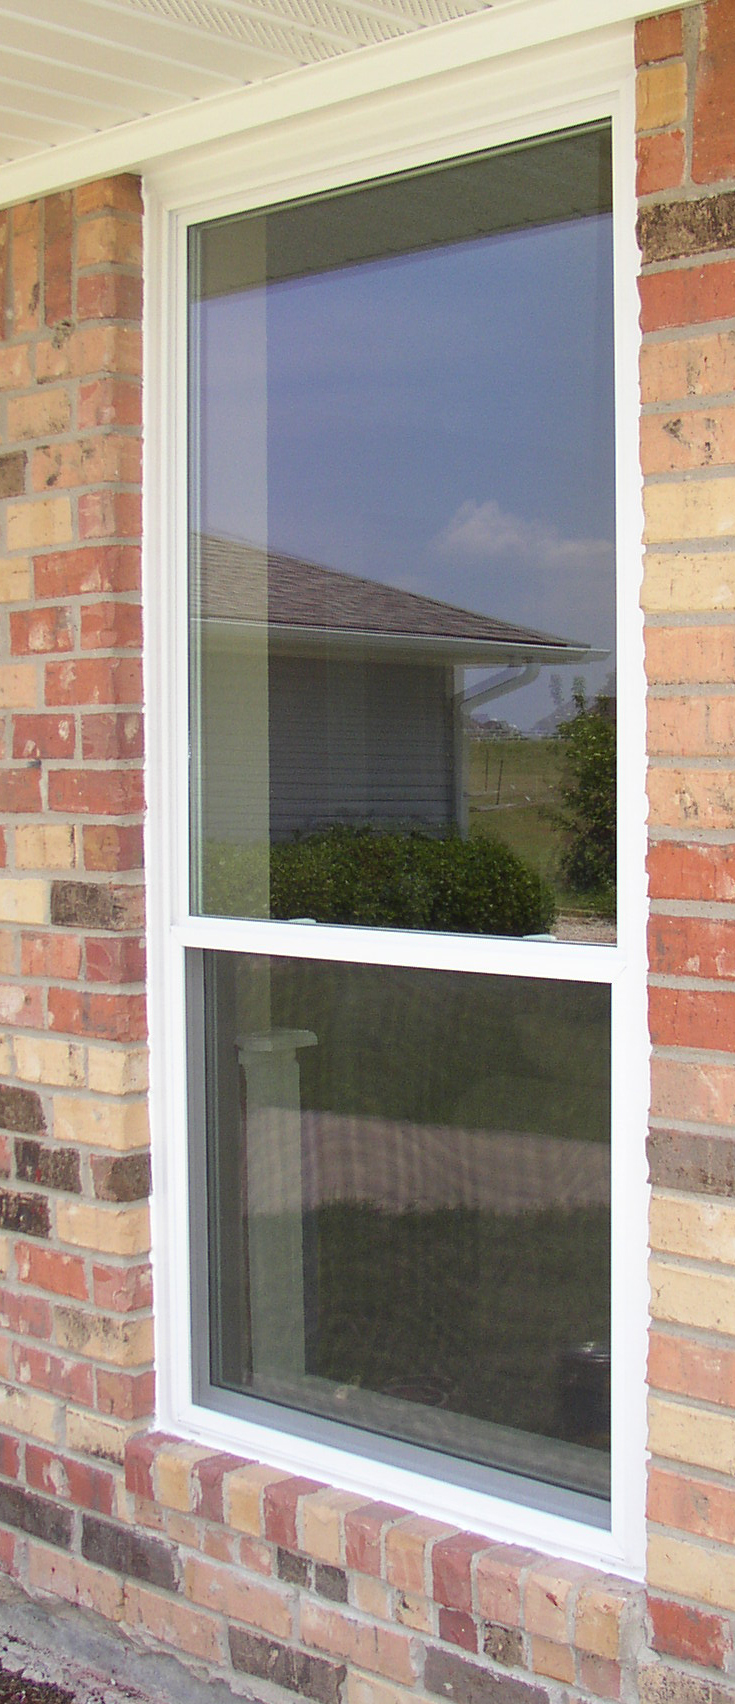 Alside Mezzo Double Hung Oriole with no grids in a brick opening.  This window has a frame that is close to three and one half inches in width for a slightly bulky wood window look on the exterior of the homes windows